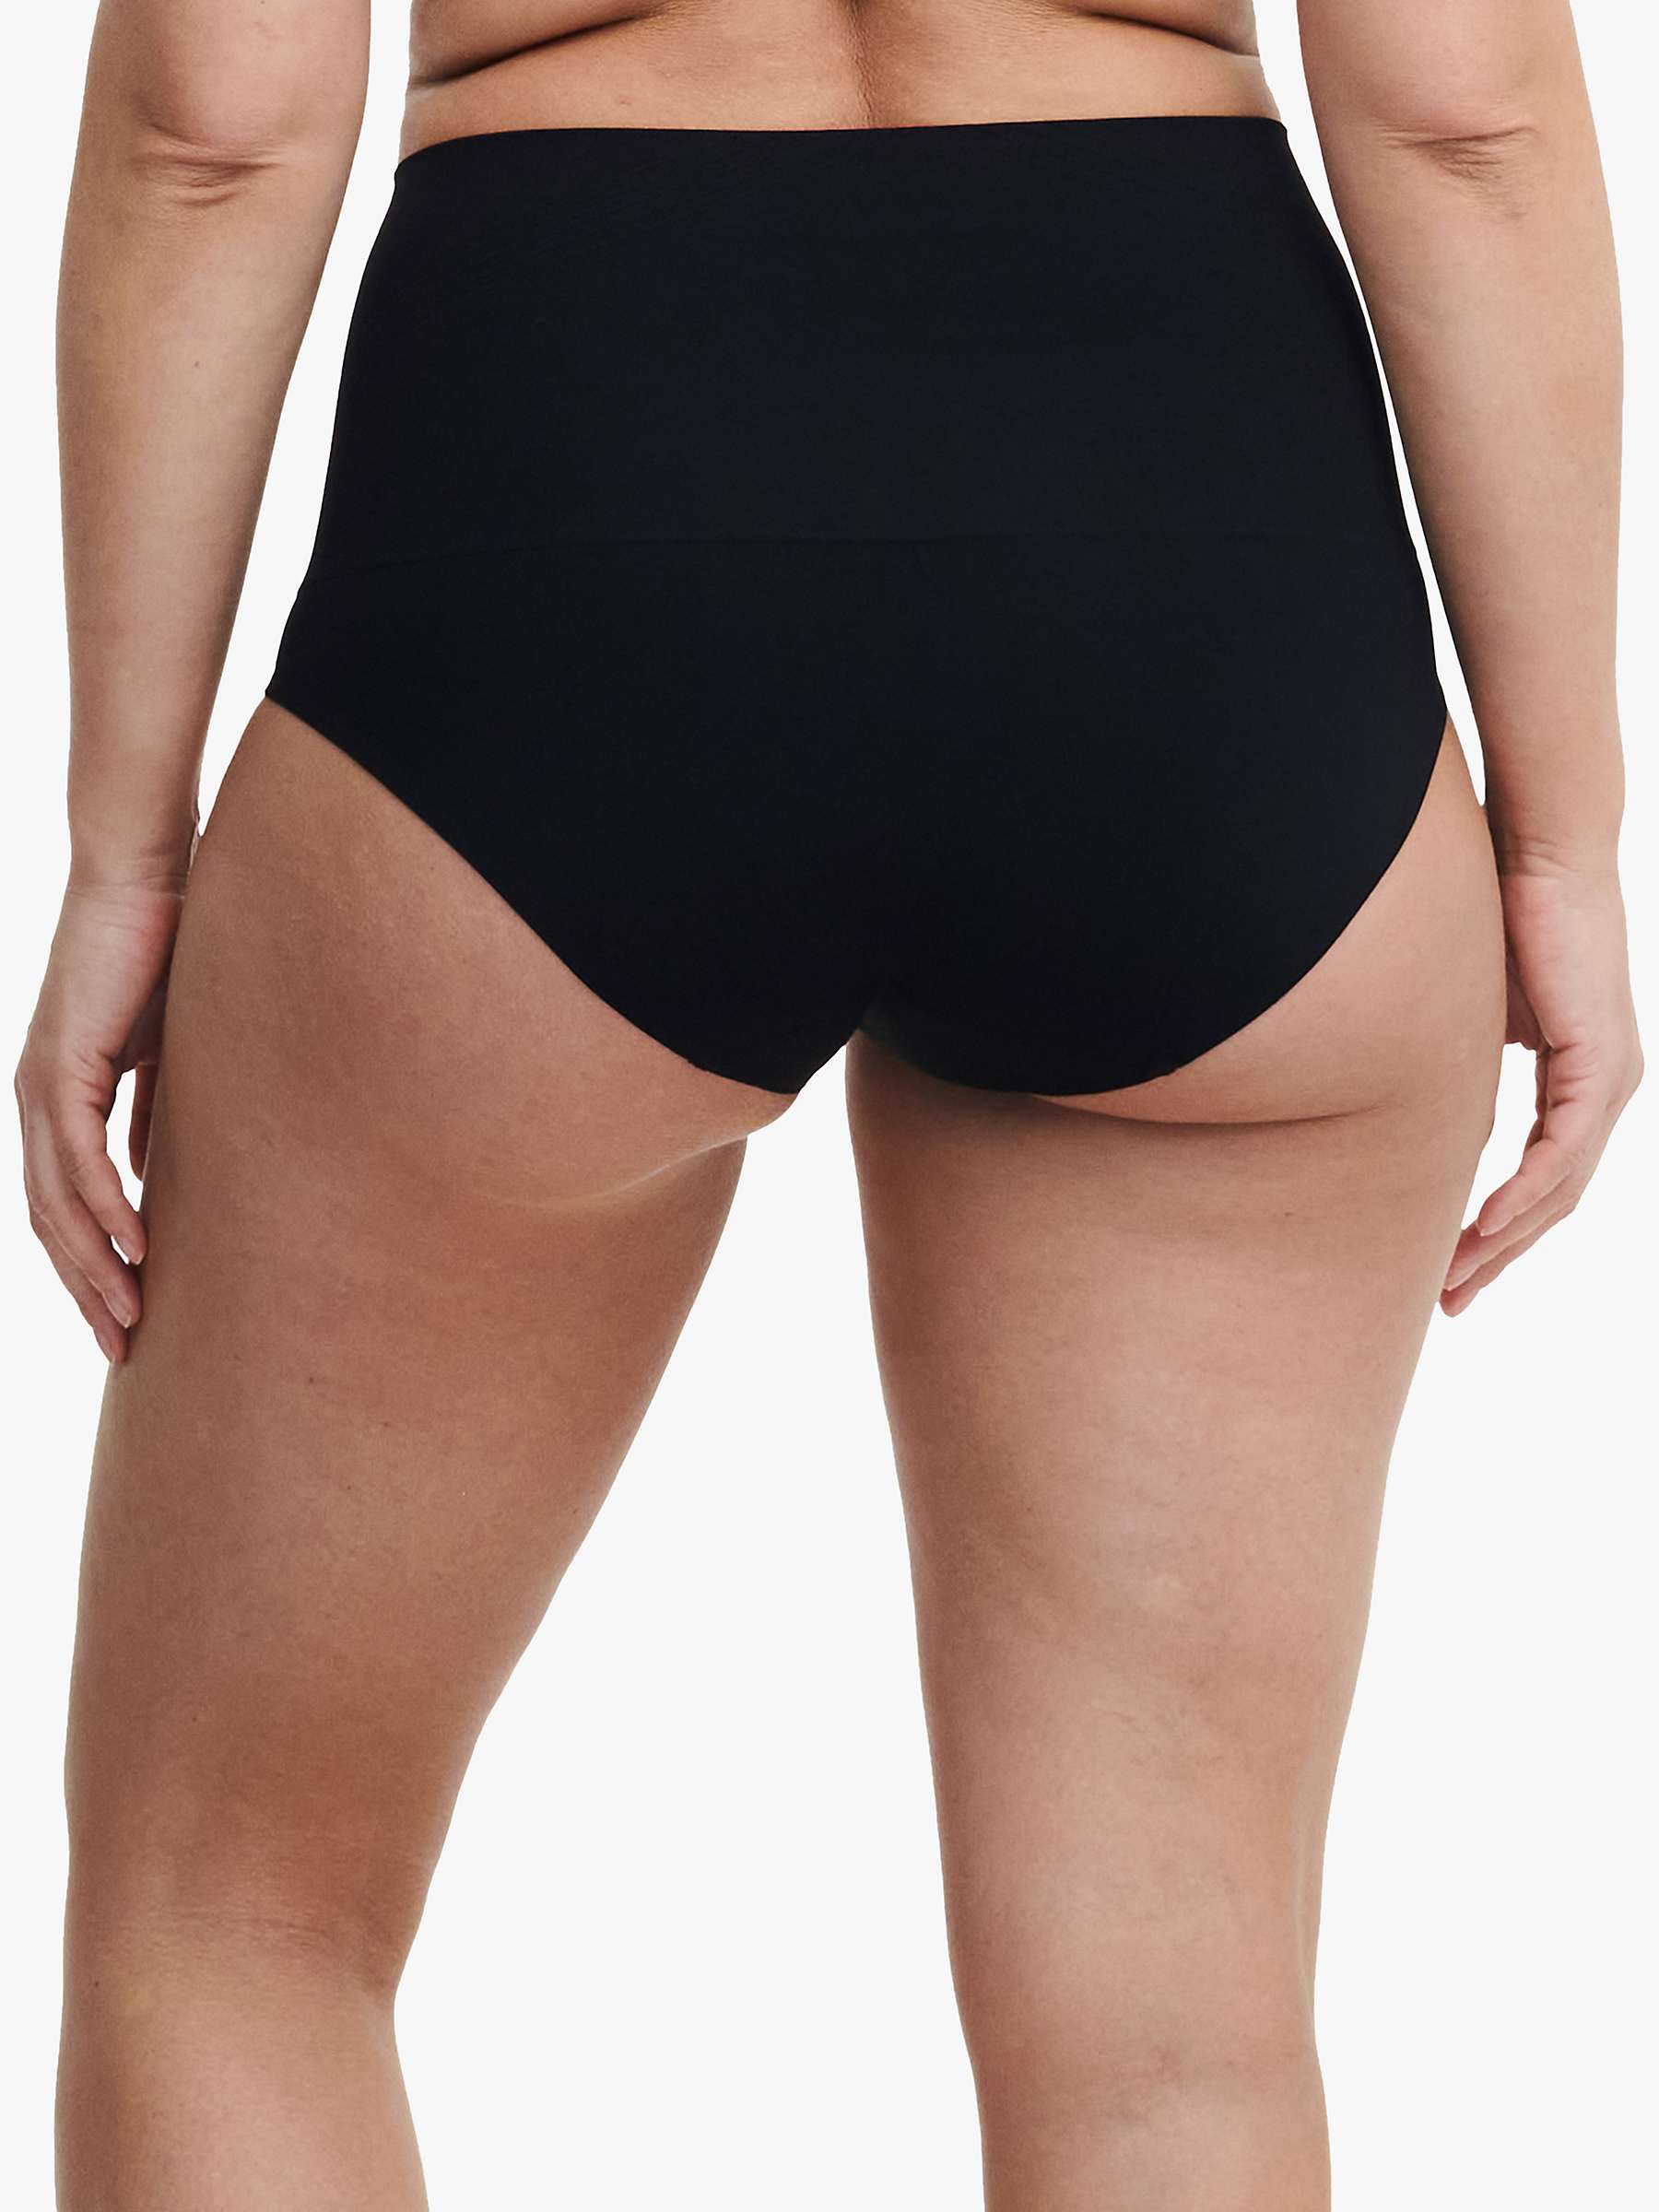 Buy Chantelle Smooth Comfort Light Shaping High Waisted Briefs Online at johnlewis.com